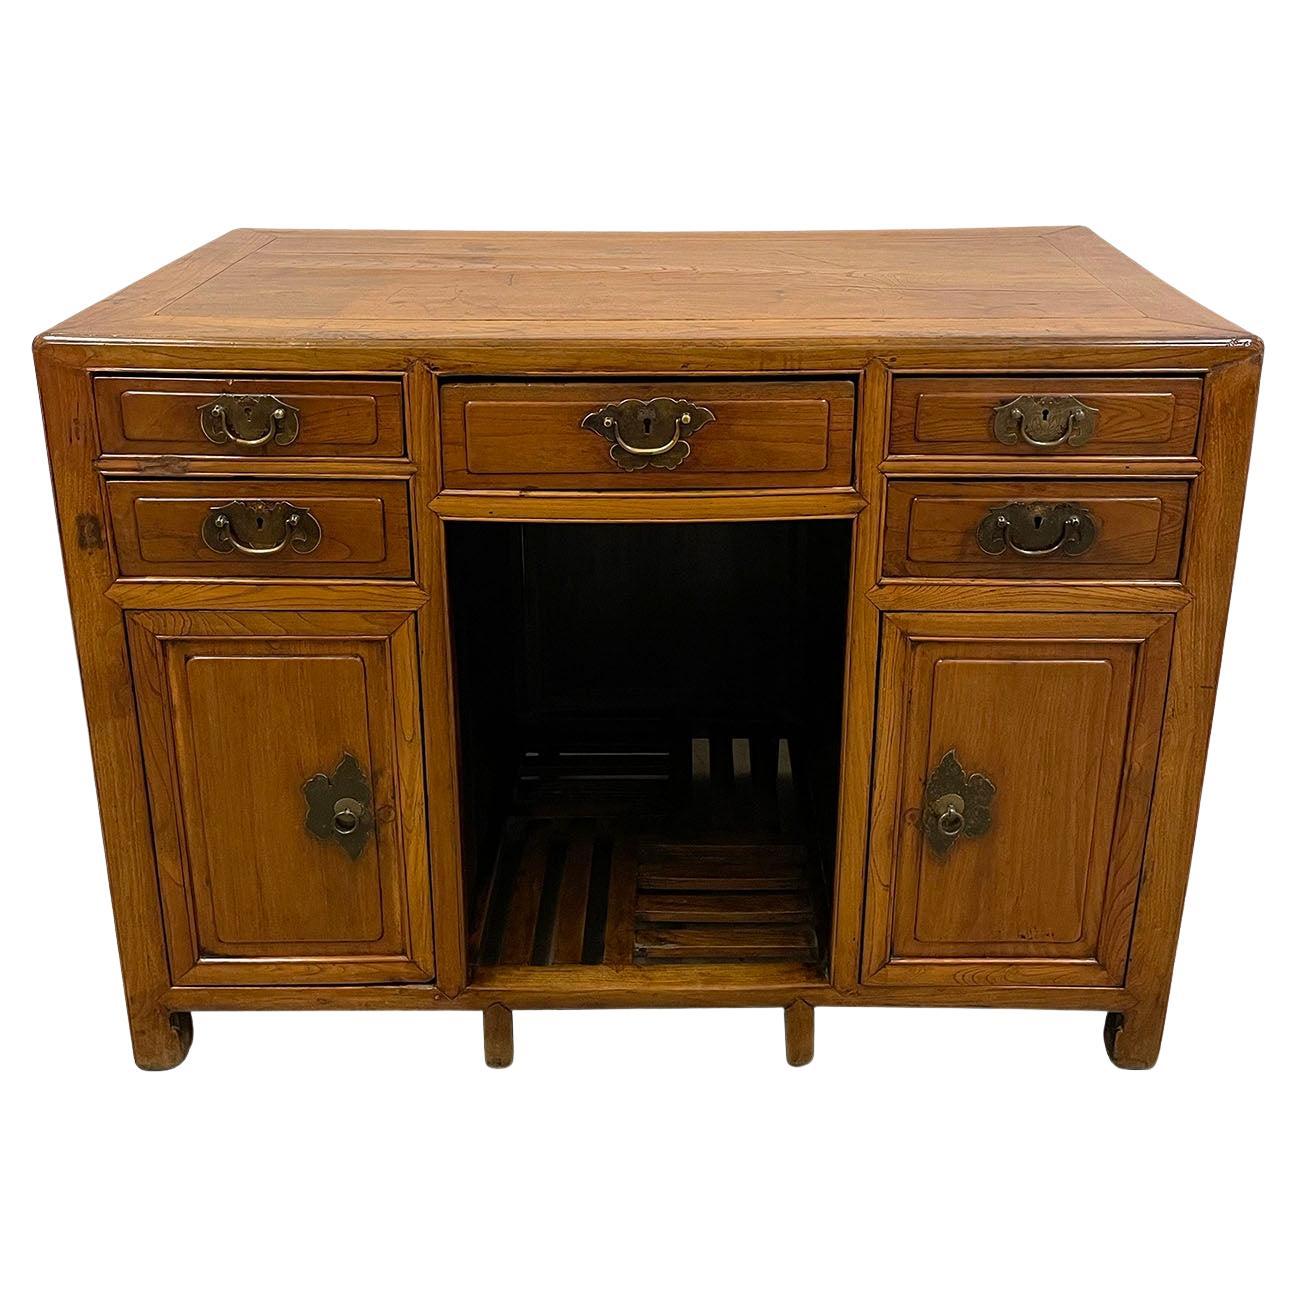 Antique, Chinese Beech Wood Writing Desk, Vanity For Sale